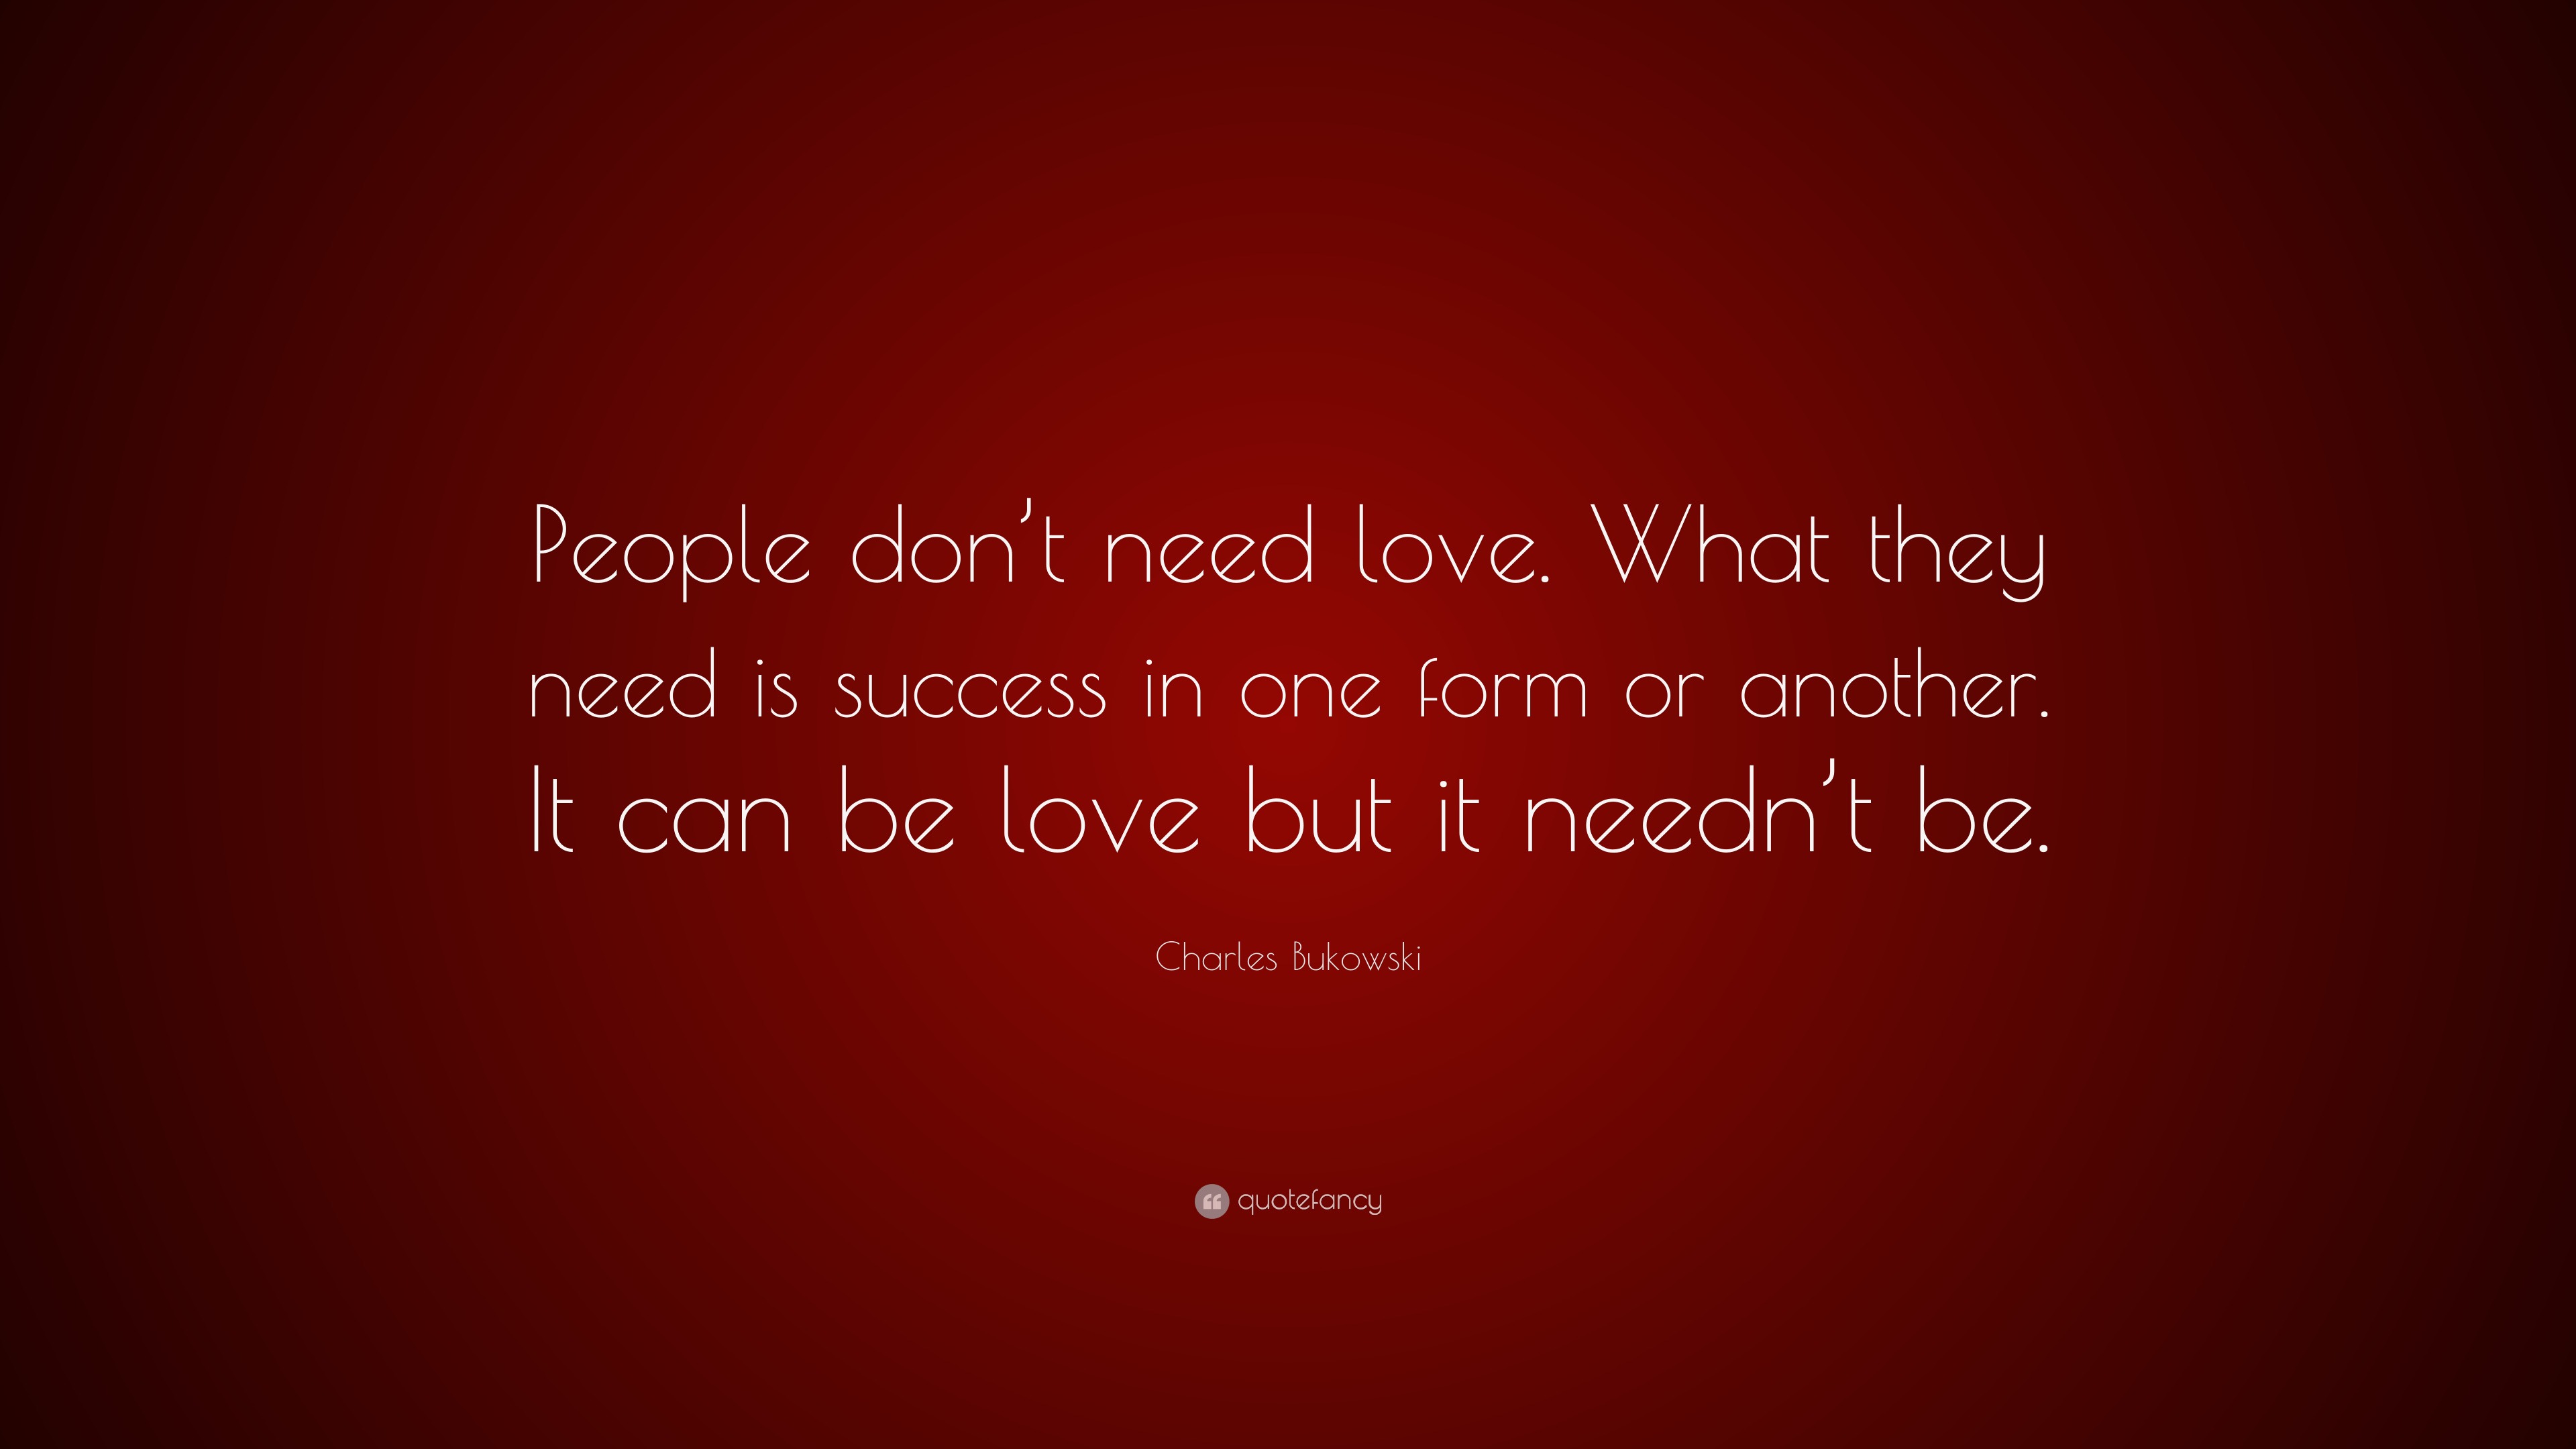 Charles Bukowski Quote “People don t need love What they need is